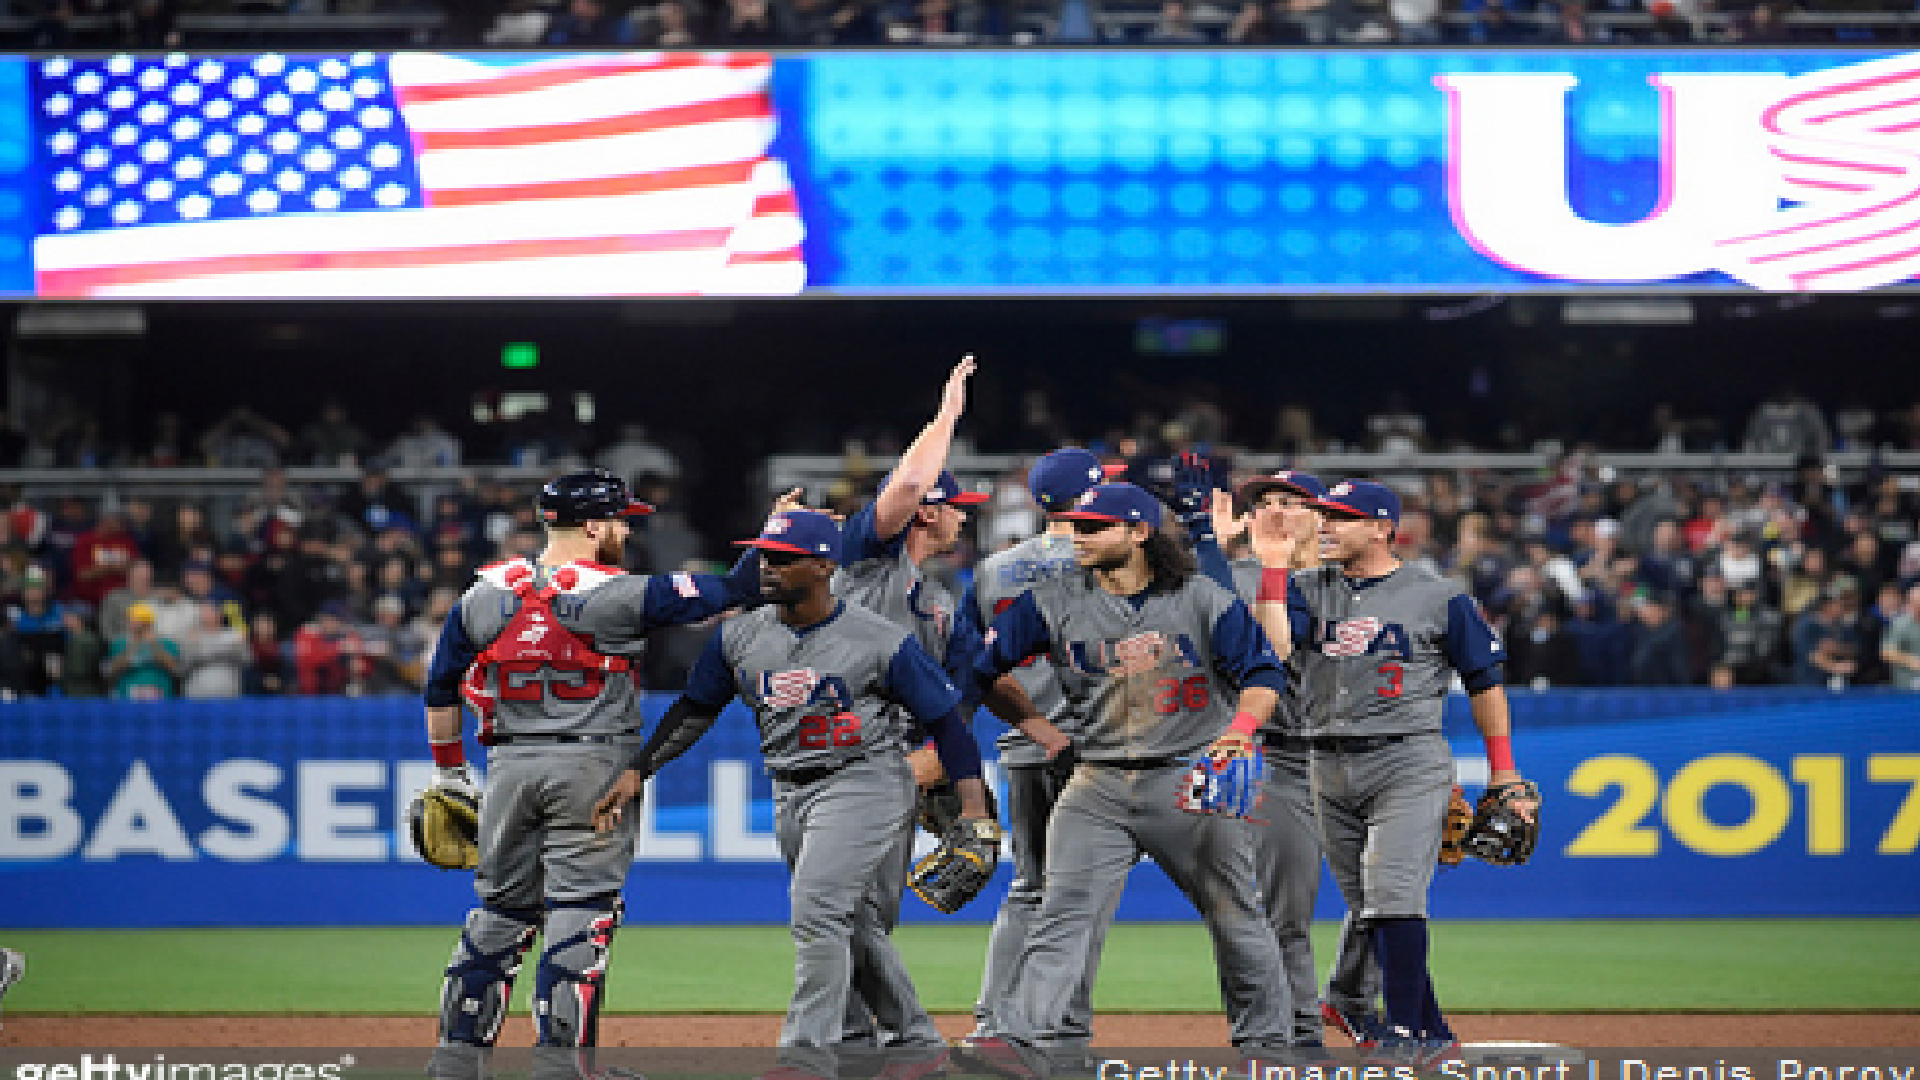 Stop Using Injuries As A Reason To Eliminate The World Baseball Classic